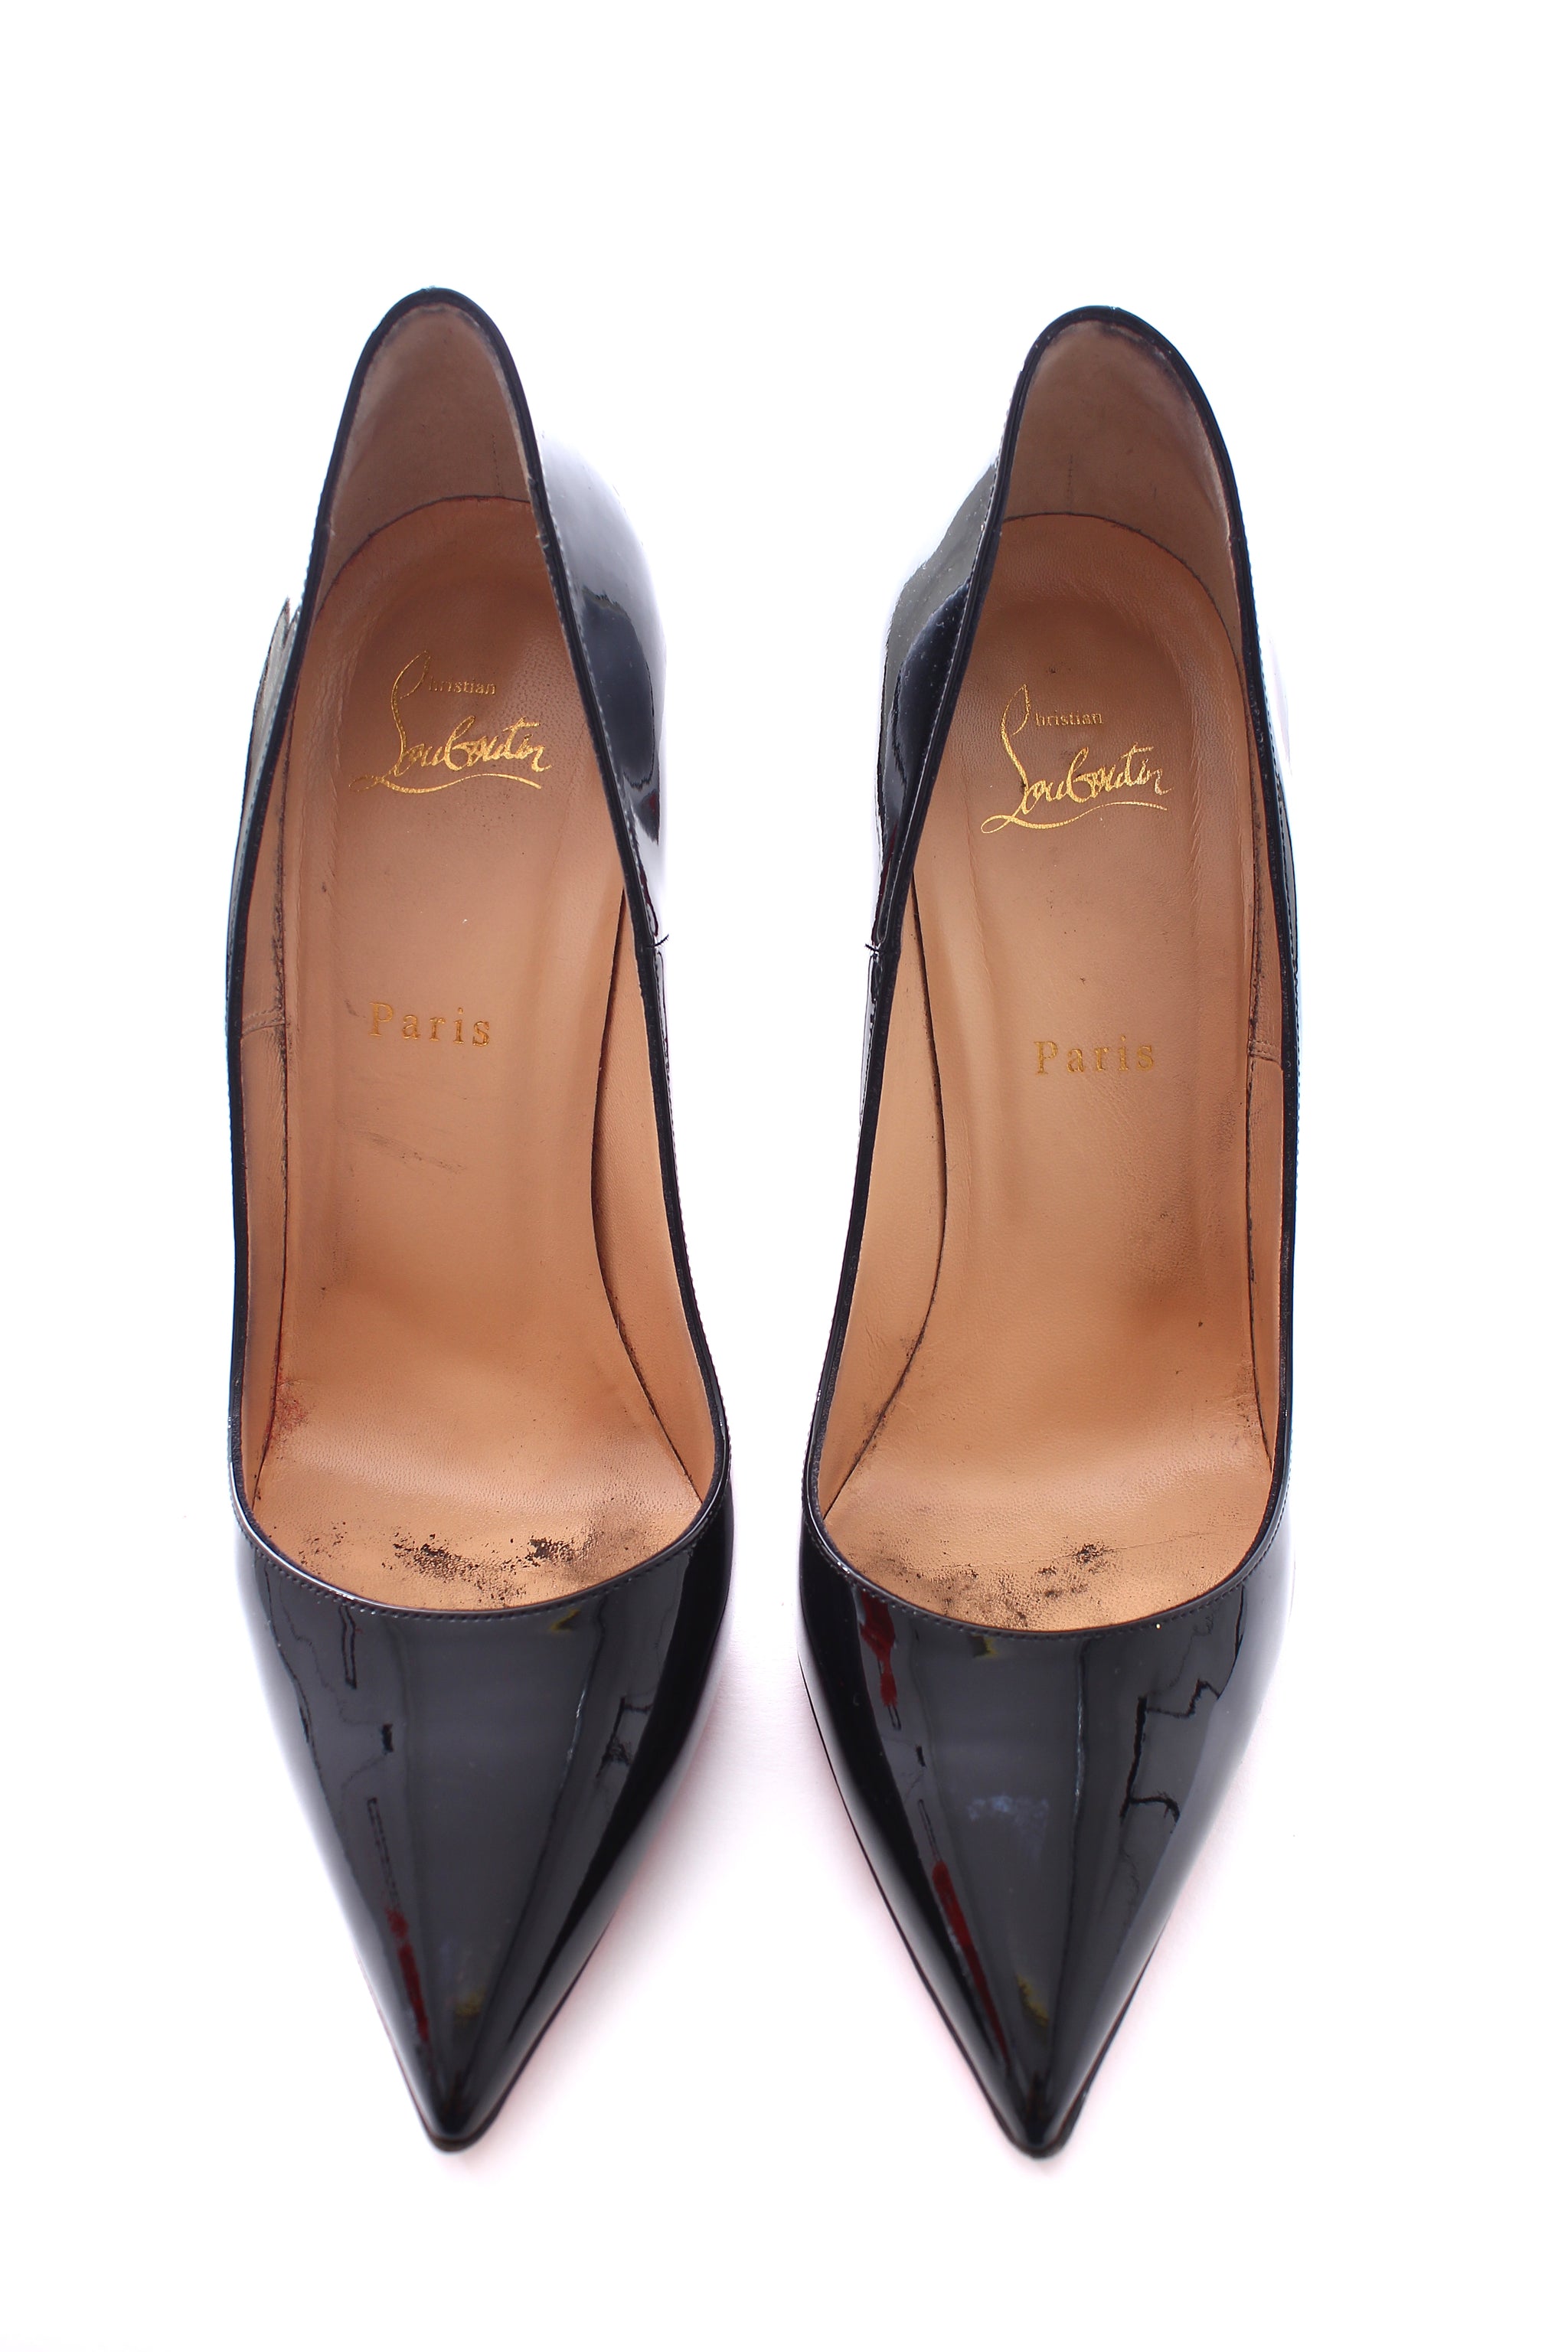 So Kate - 120 mm Pumps - Patent calf leather - Blush - Christian